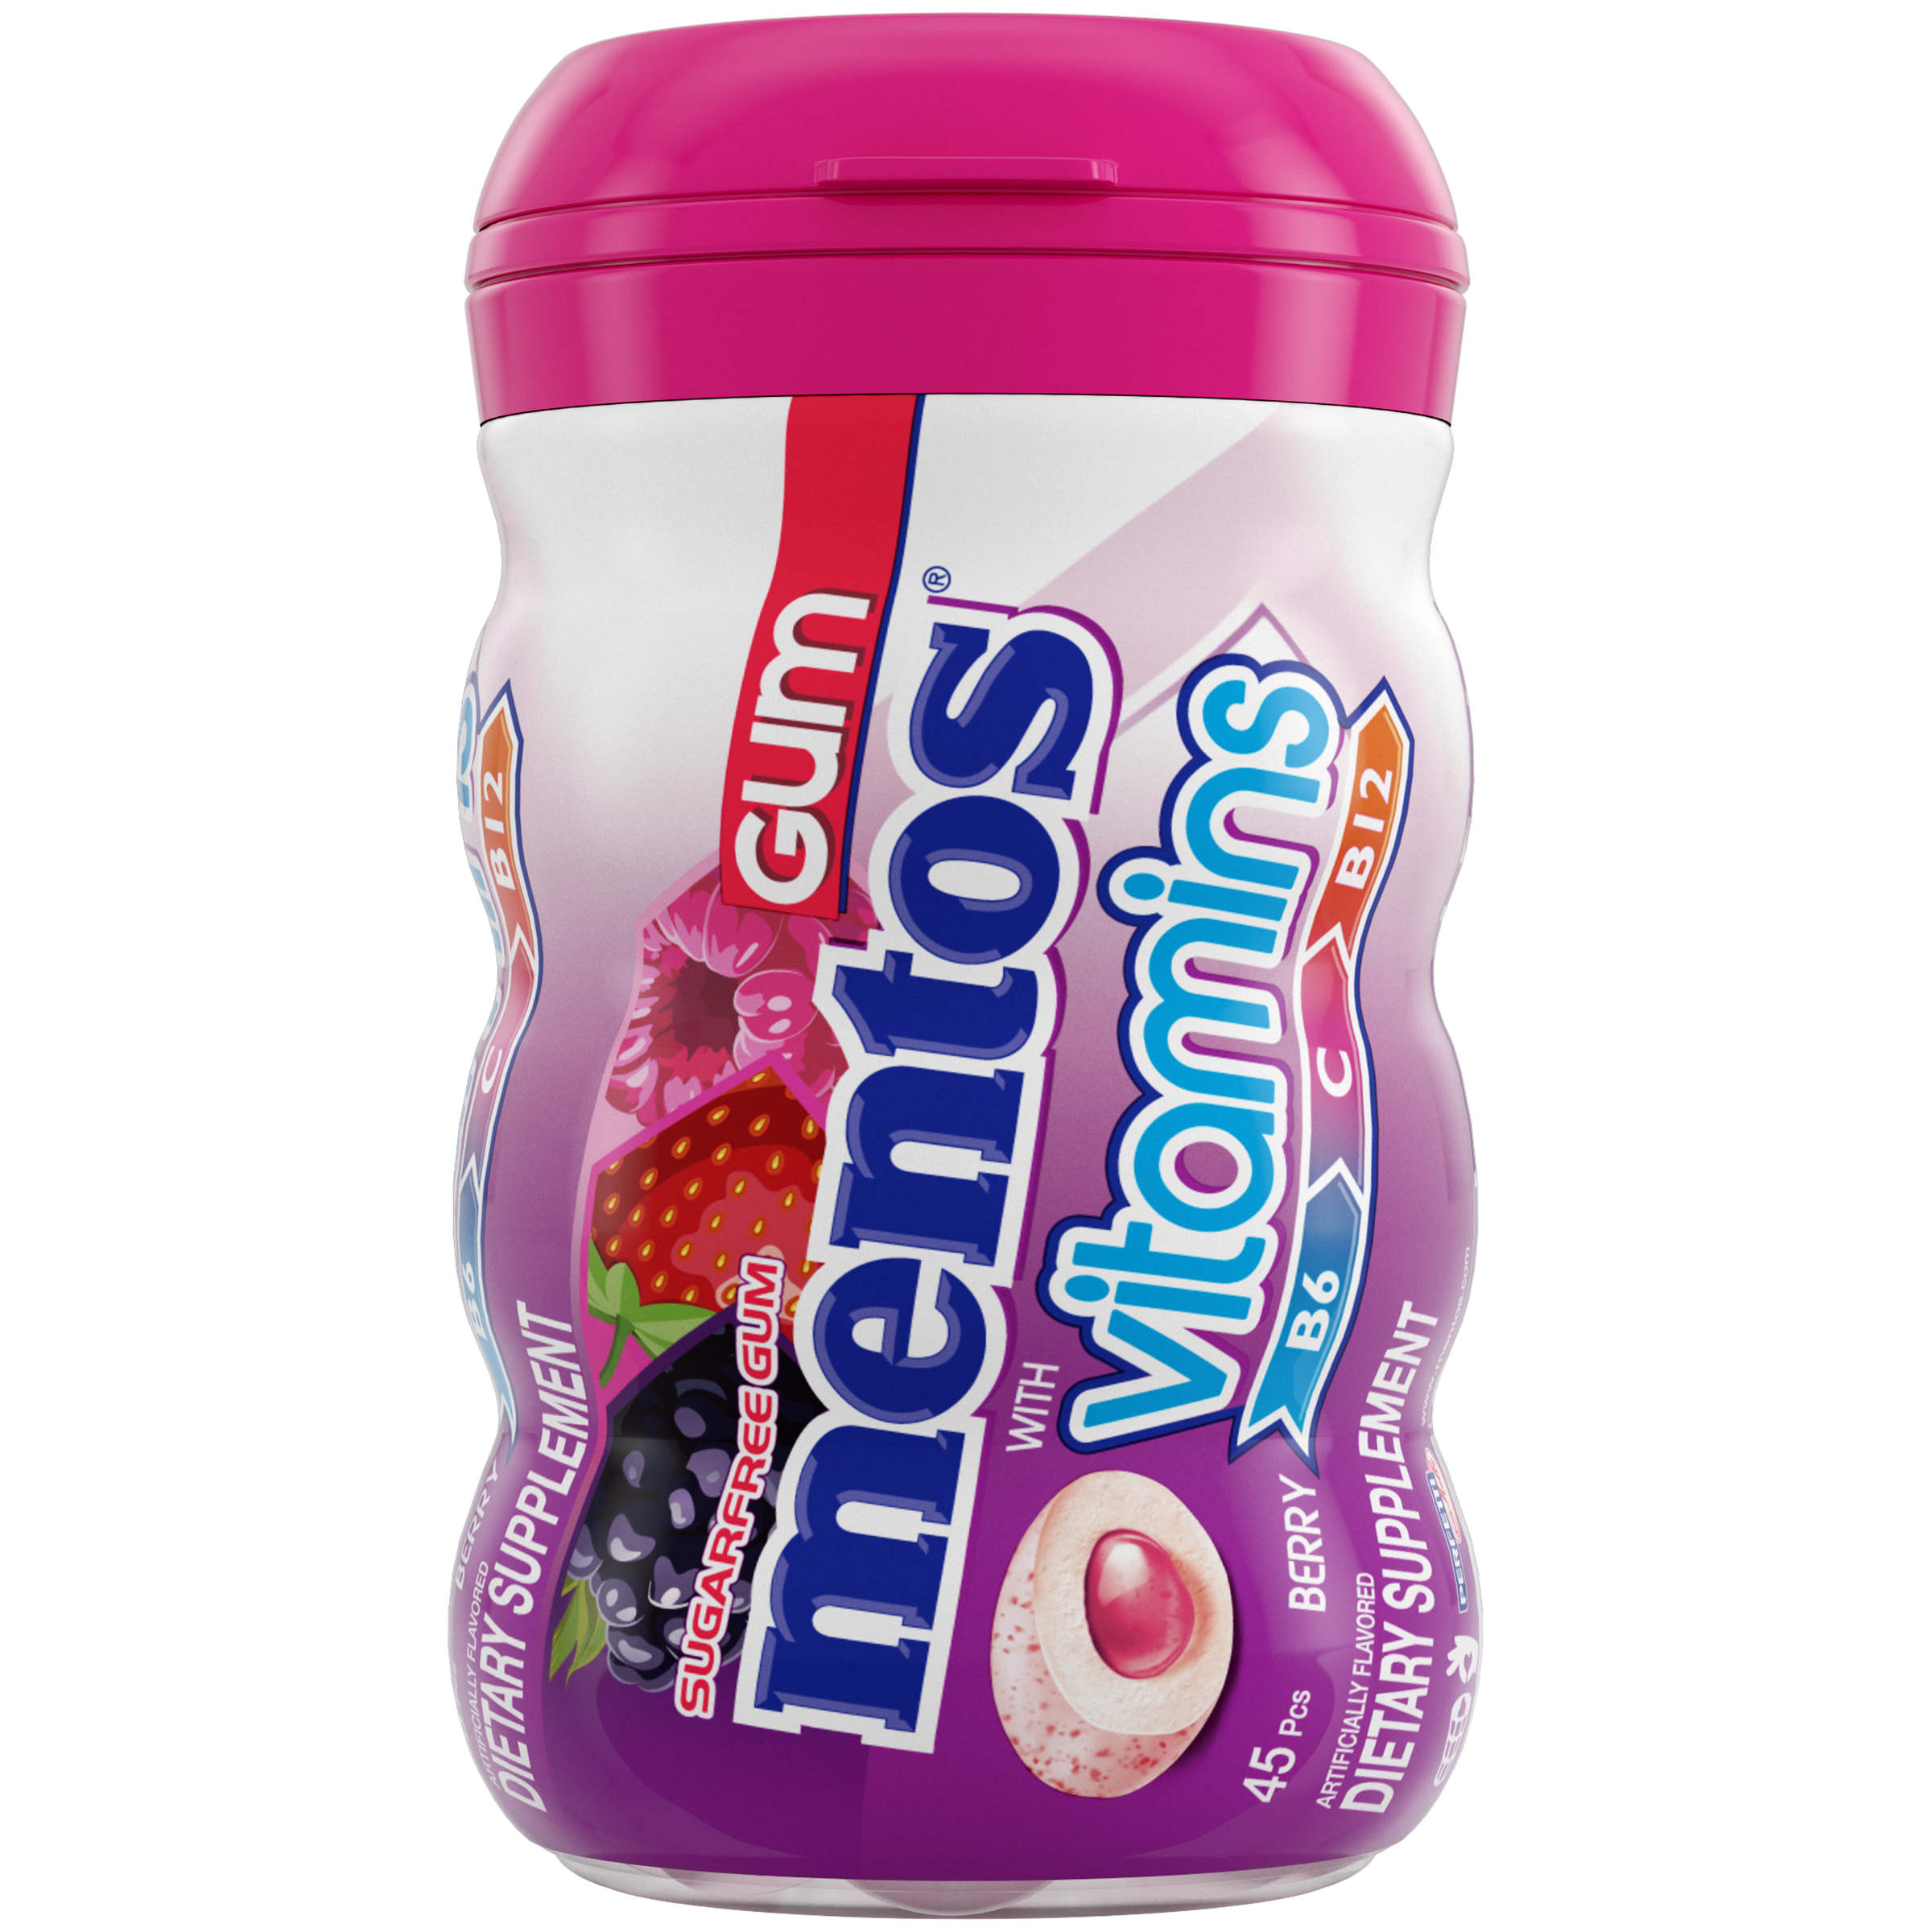 Mentos Always White Sugar-Free Chewing Gum With Xylitol, Bubble Fresh, 100  Piece Bottle (Pack Of 4) 